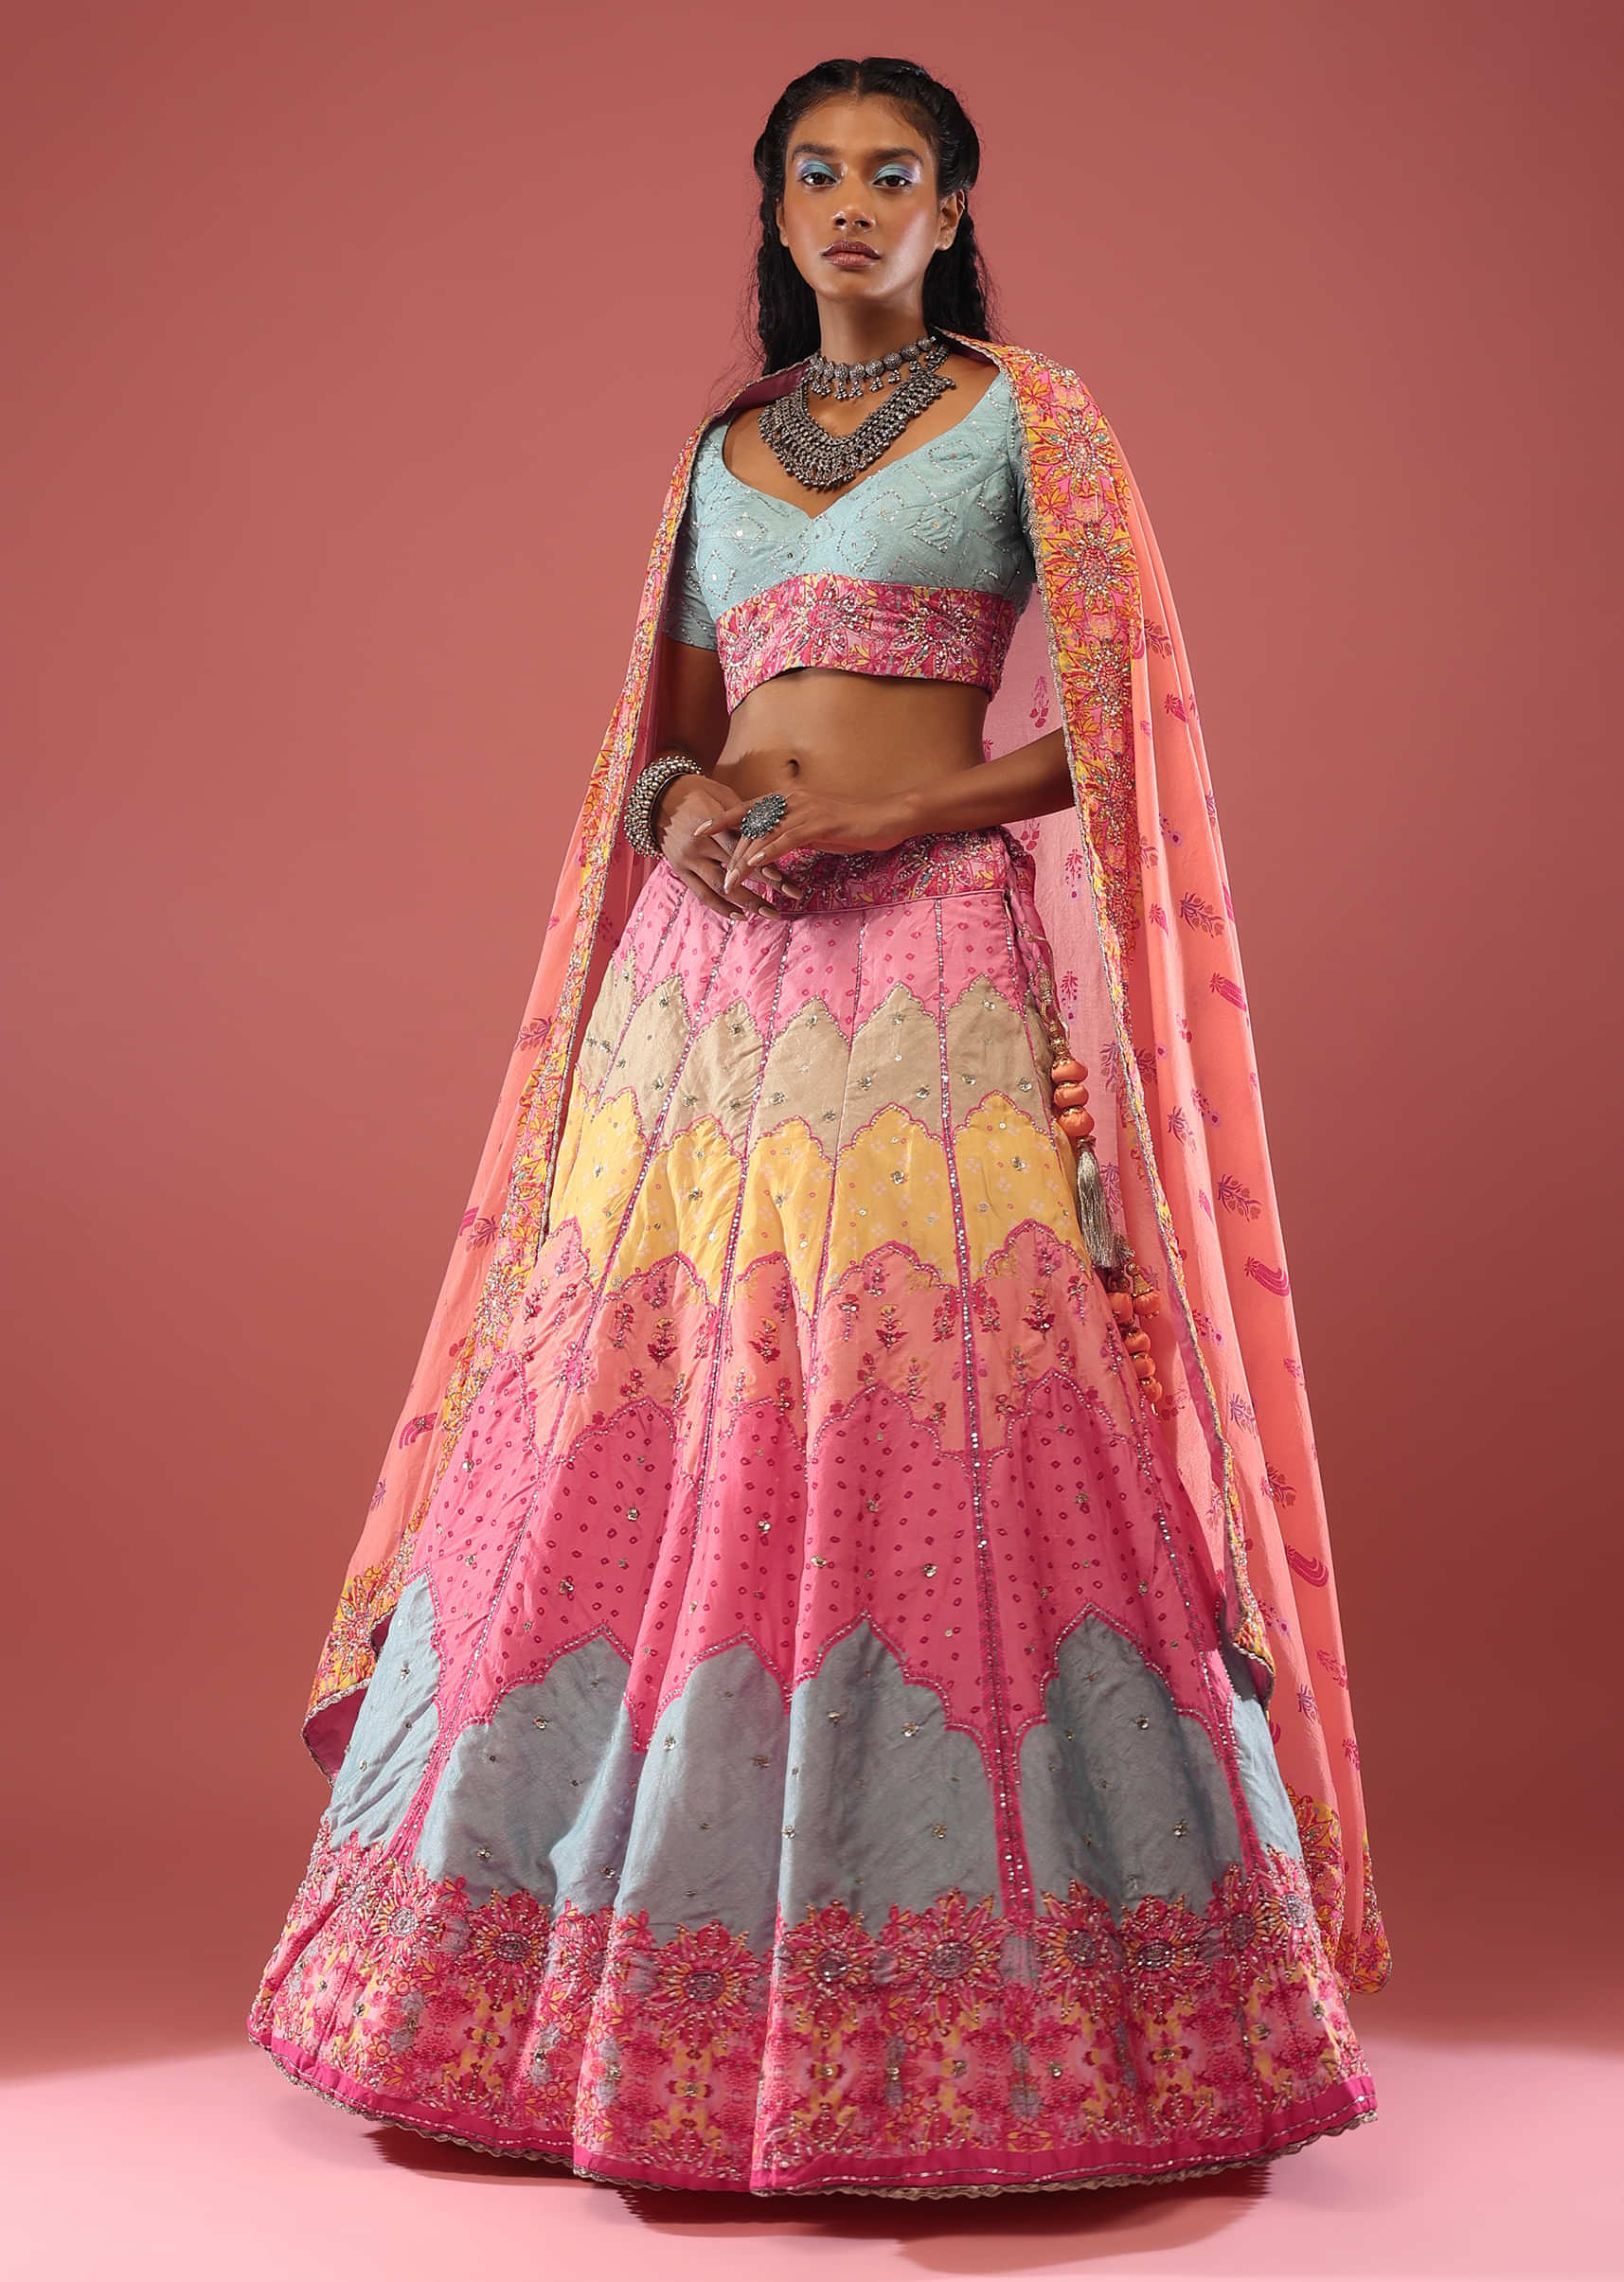 Multi Coloured Bandhani Print Lehenga Choli In Silk Inspired From Mughal Architecture And Hand Embroidery Detailing